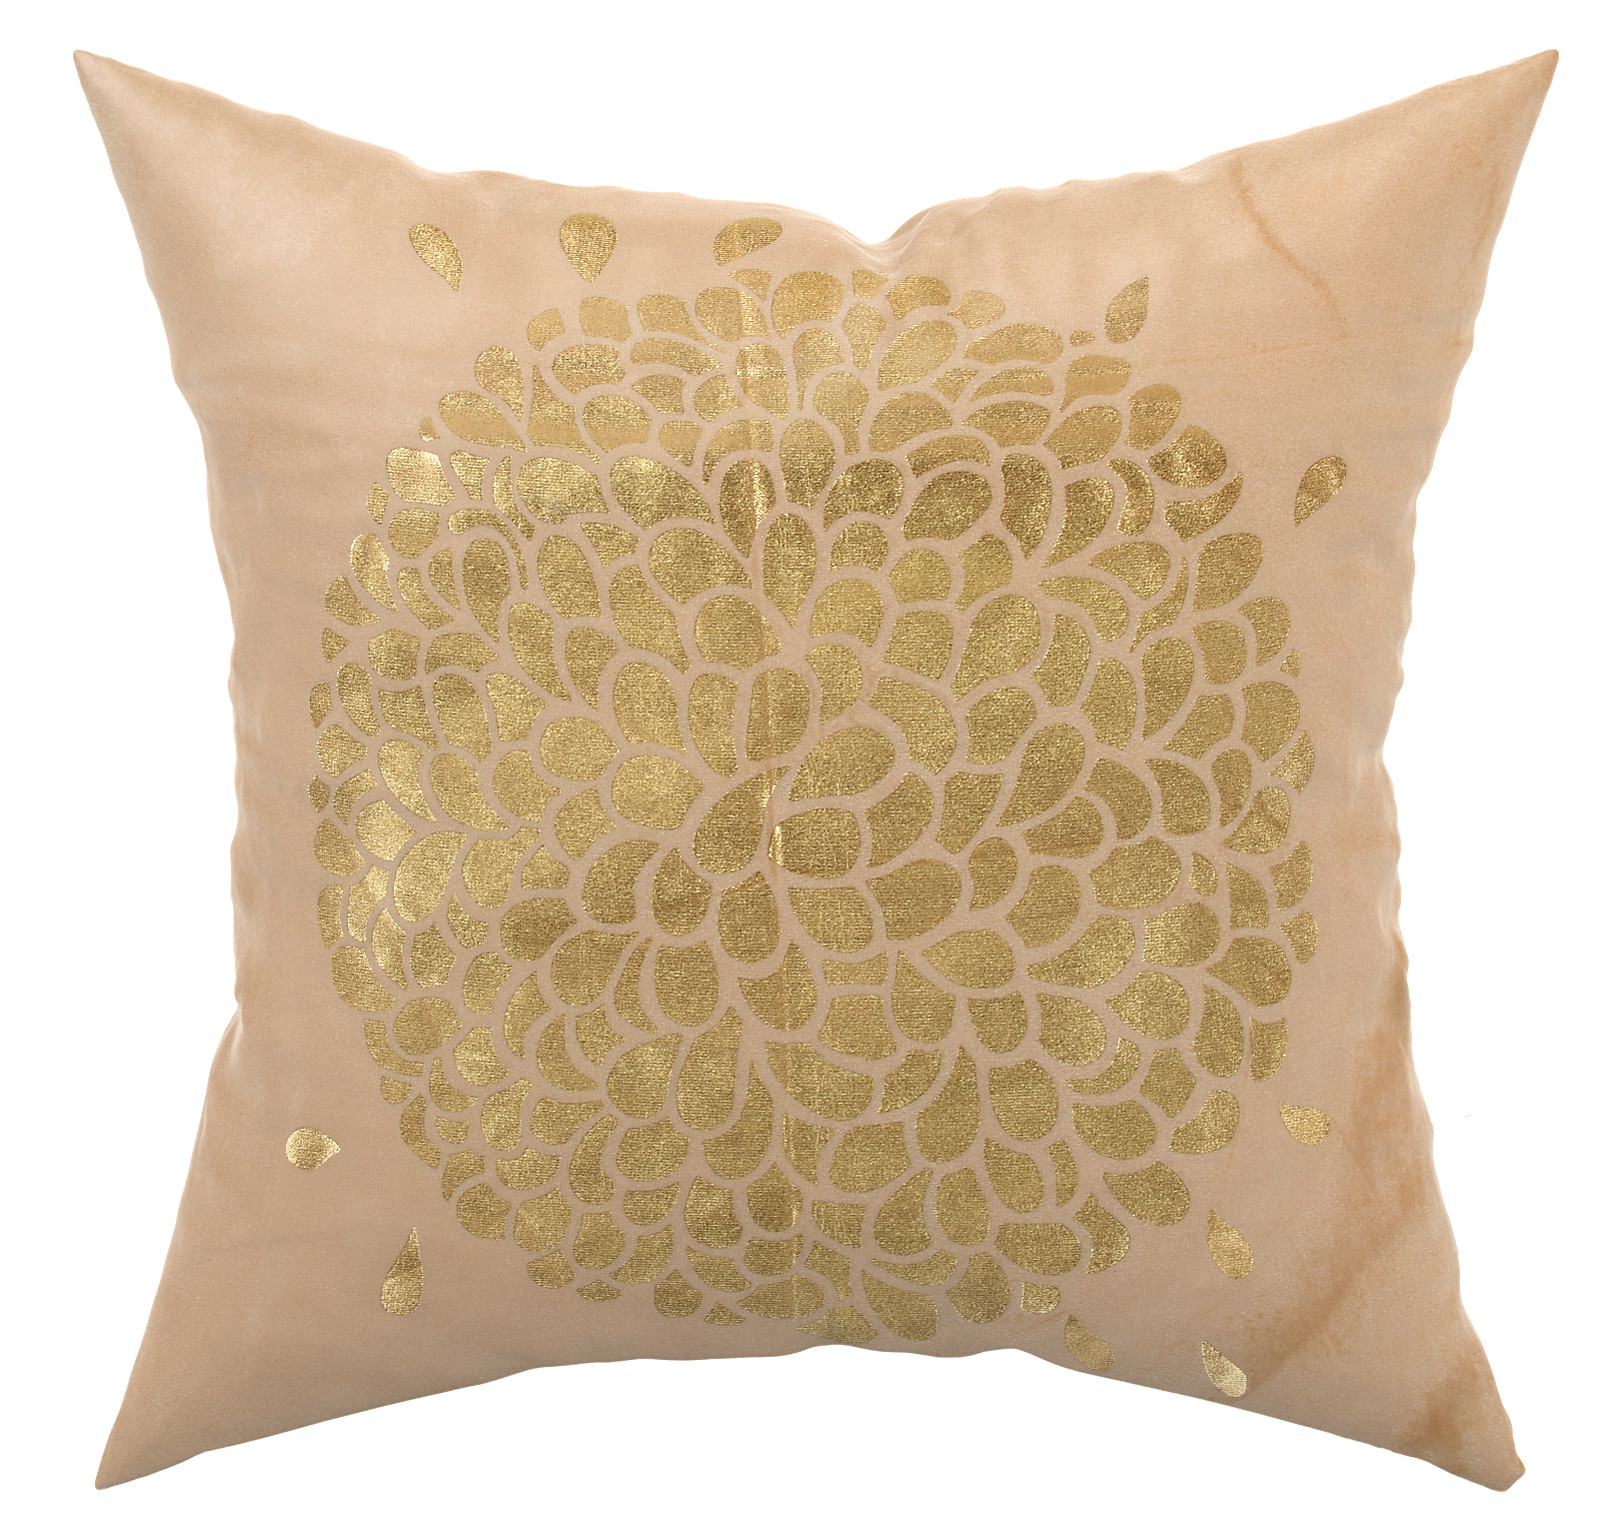 Kuber Industries Velvet Floral Design Soft Decorative Square Throw Pillow Cover, Cushion Covers, Pillow Case For Sofa Couch Bed Chair 16x16 Inch-(Cream)